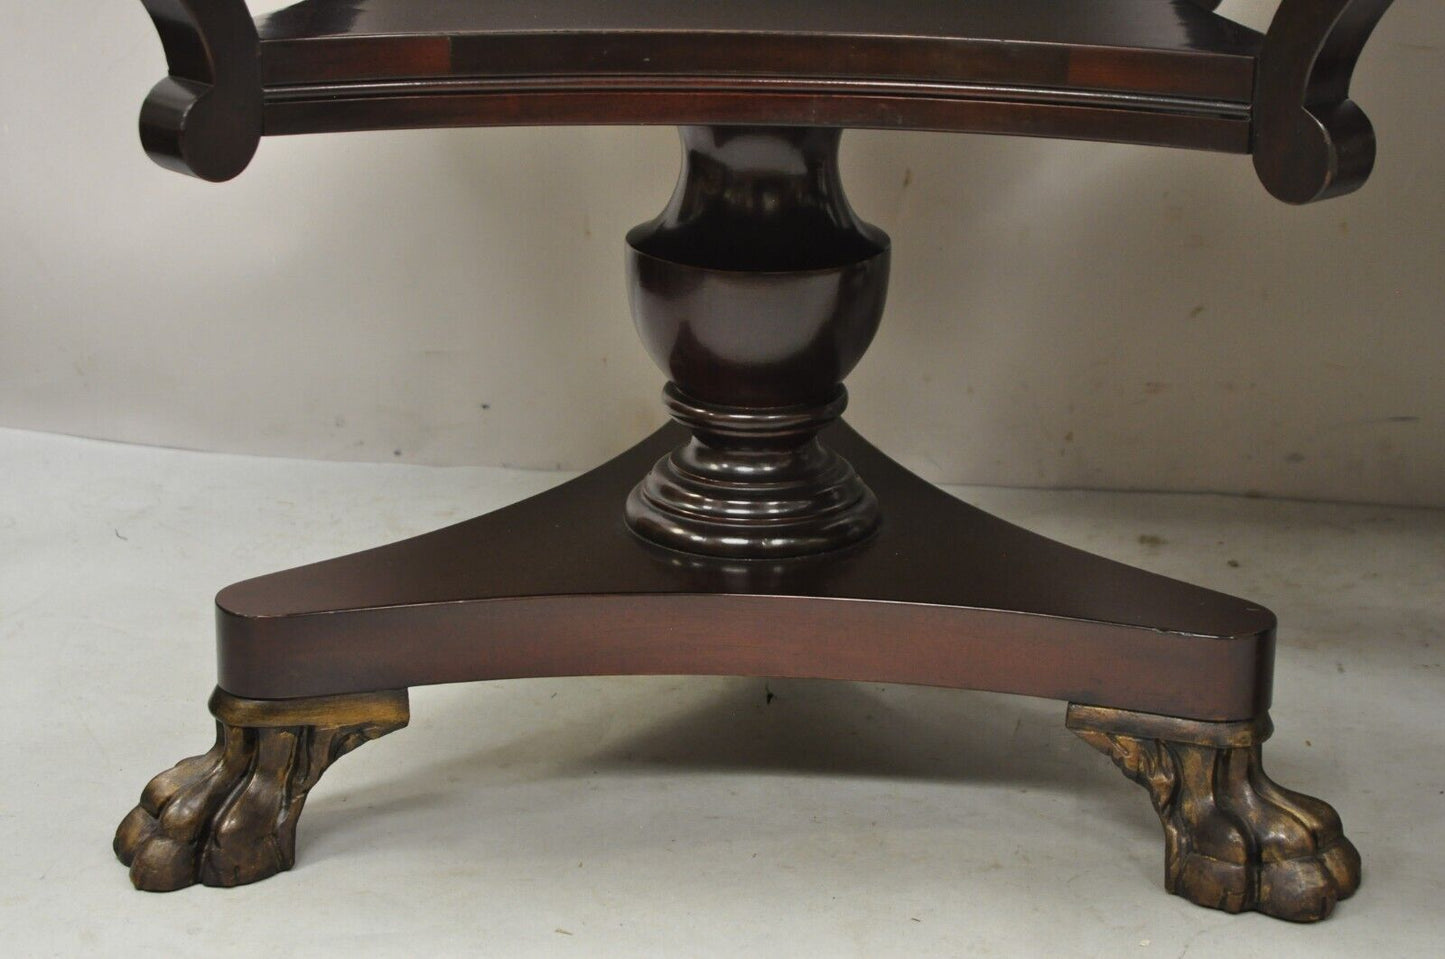 Vintage French Empire Style Mahogany Paw Feet Side Tables - a Pair